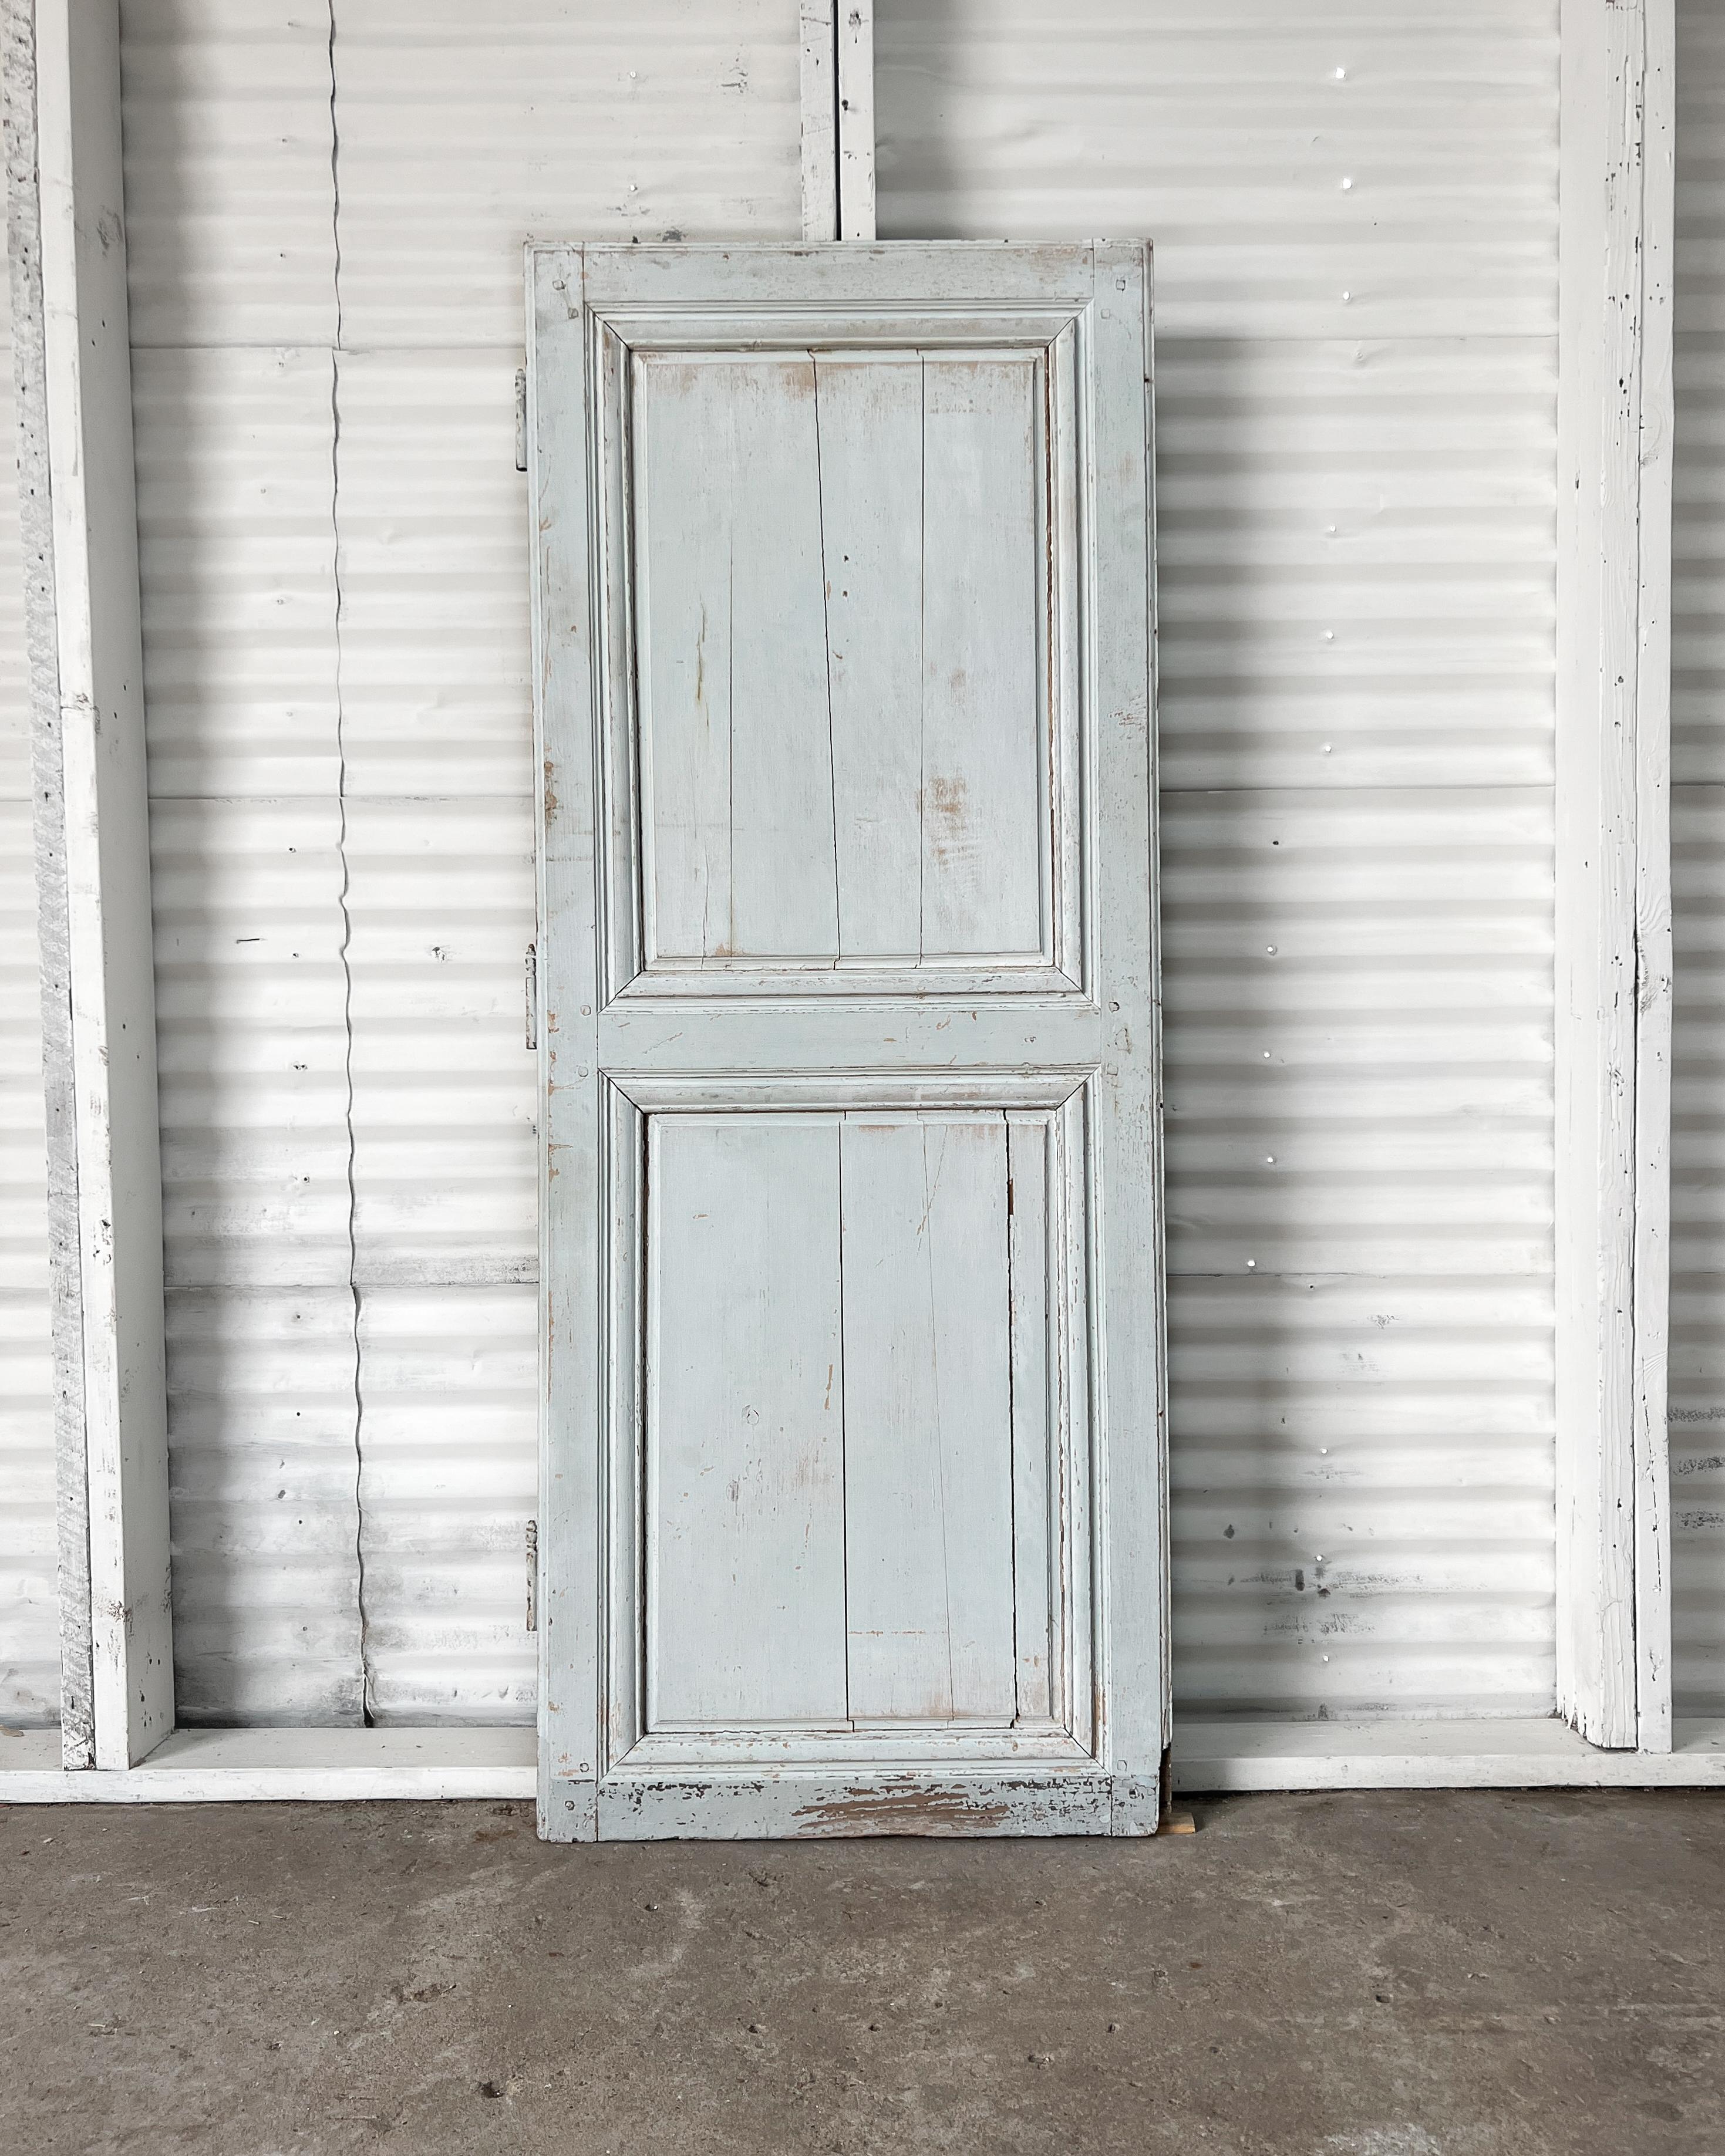 19th-century 2-panel French door with raised panels and grooved beveled trim detailing. Install in a new home to enclose a pantry or linen cupboard to instantly add a layer of charm and character that can’t be replicated with modern mass-produced